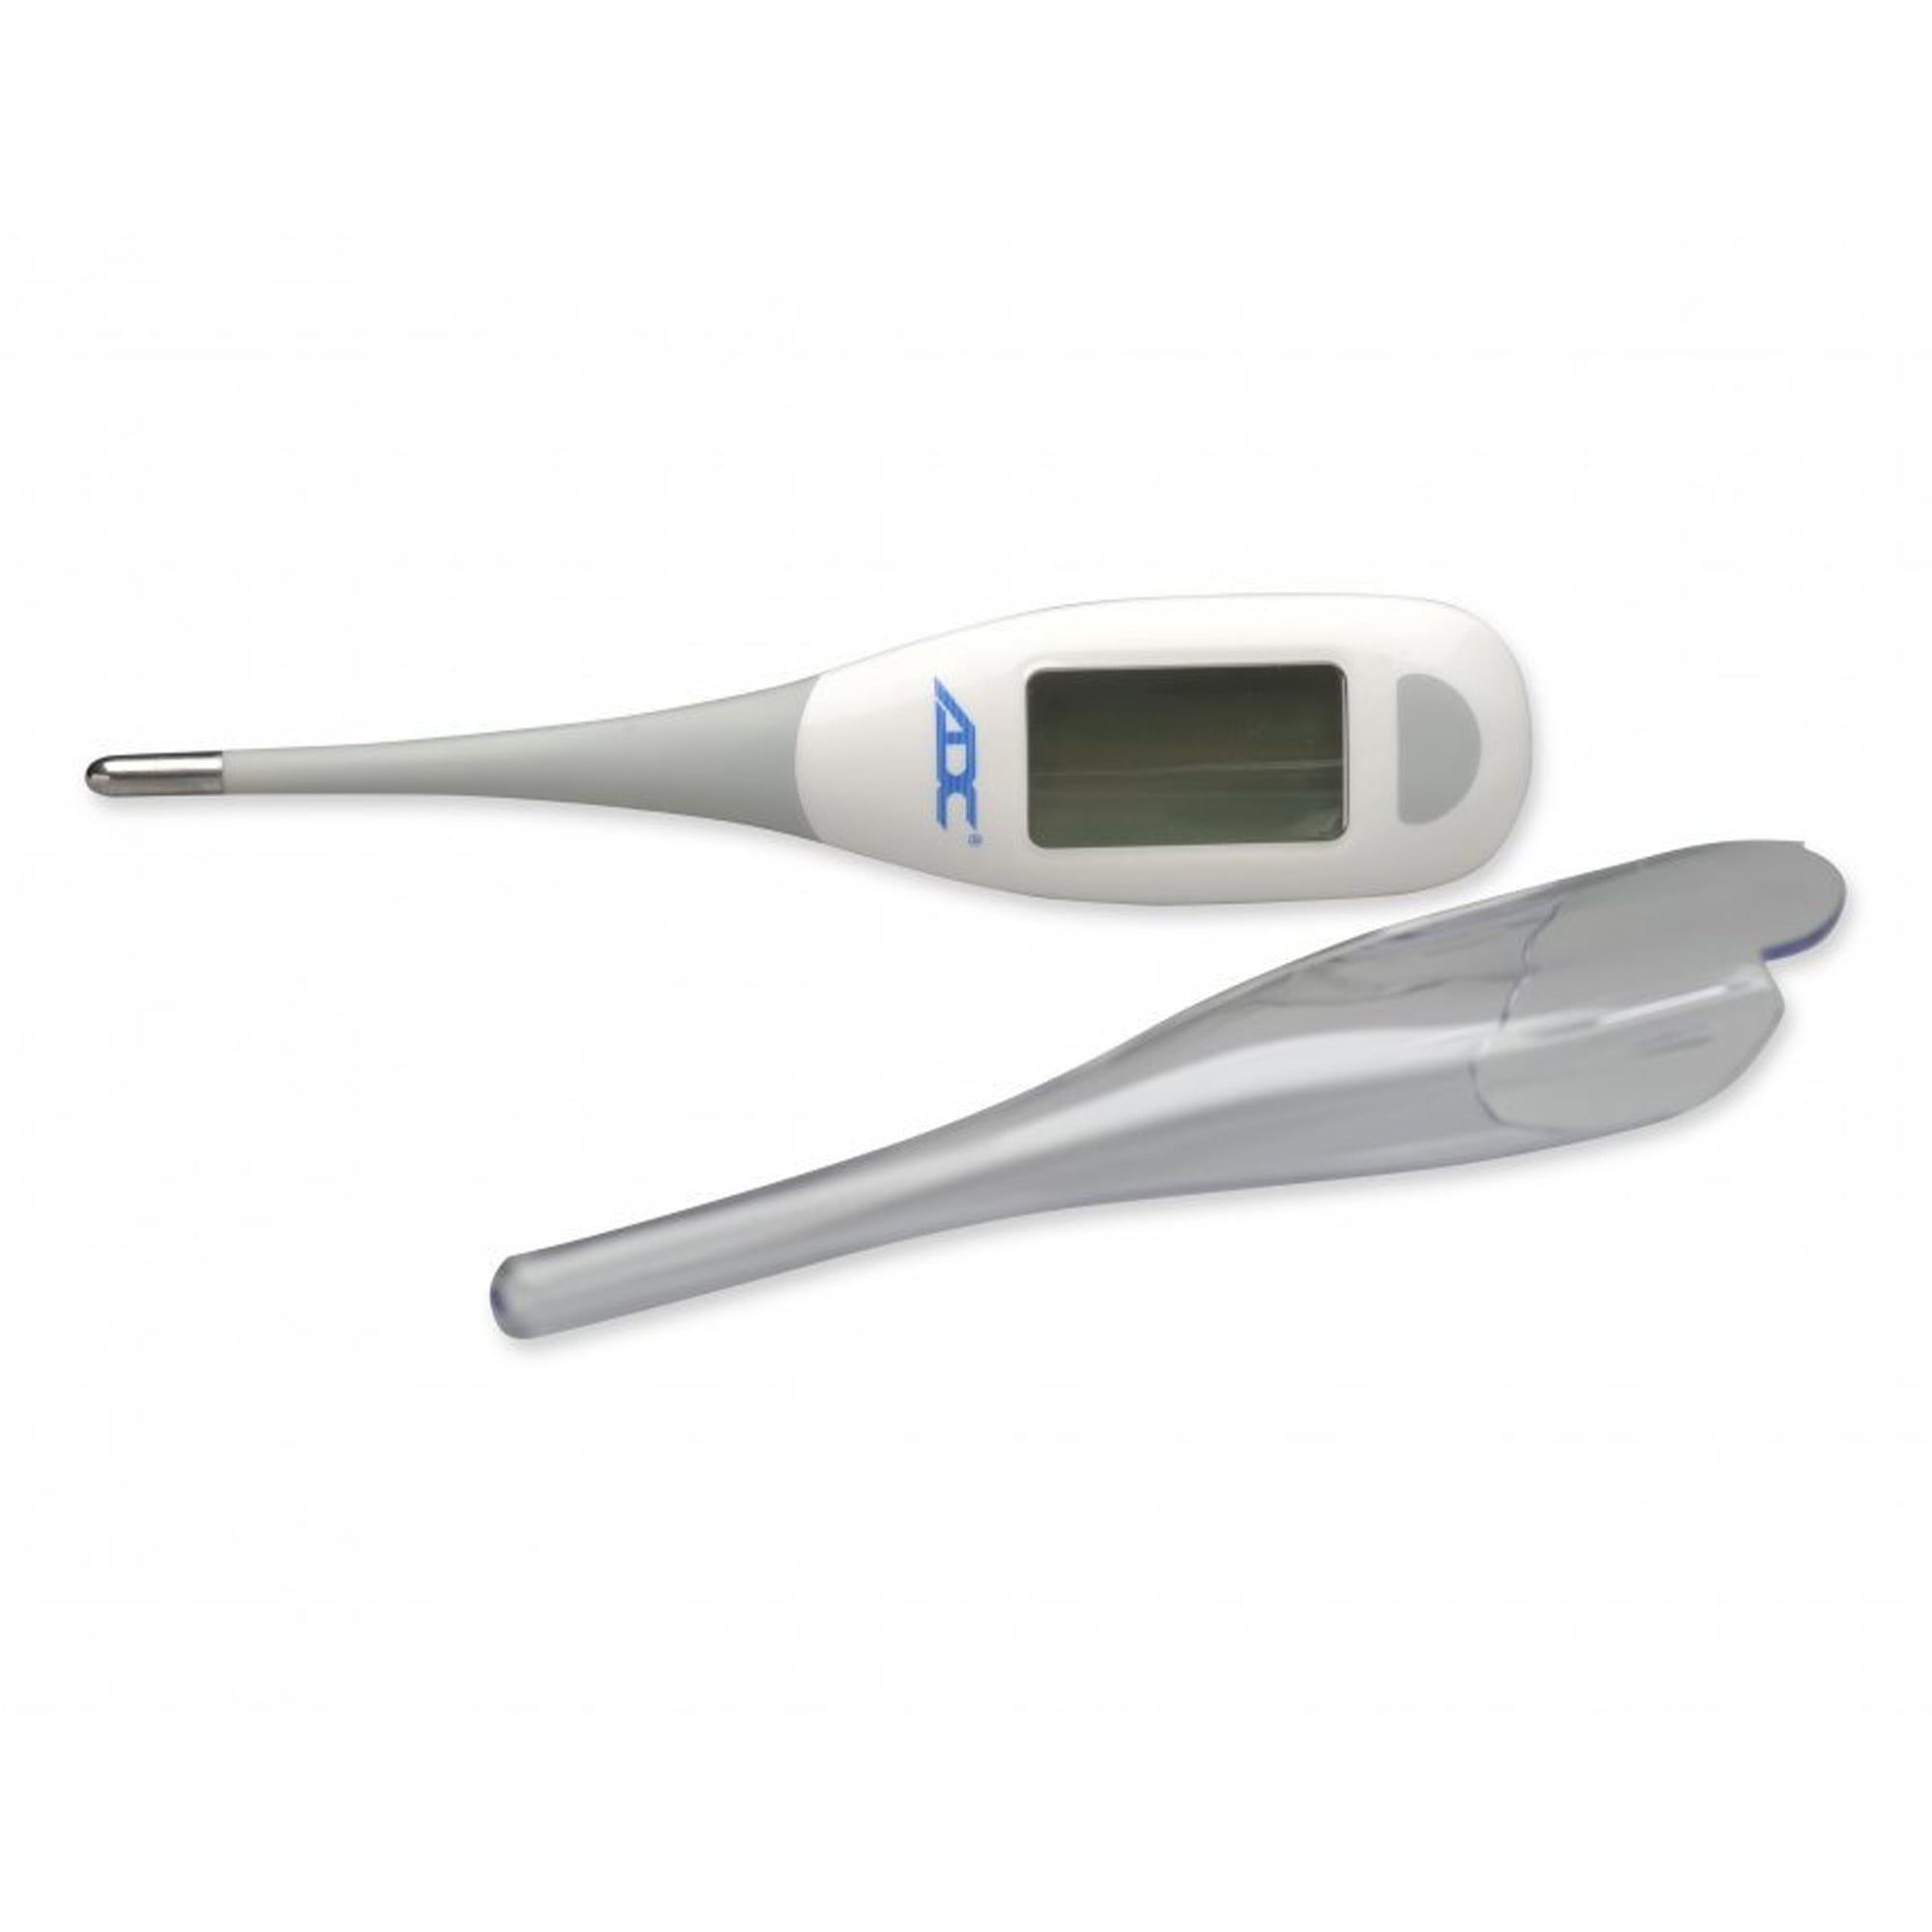 LCD PANEL THERMOMETER WITH PROBE UP TO 110C - Dymbox